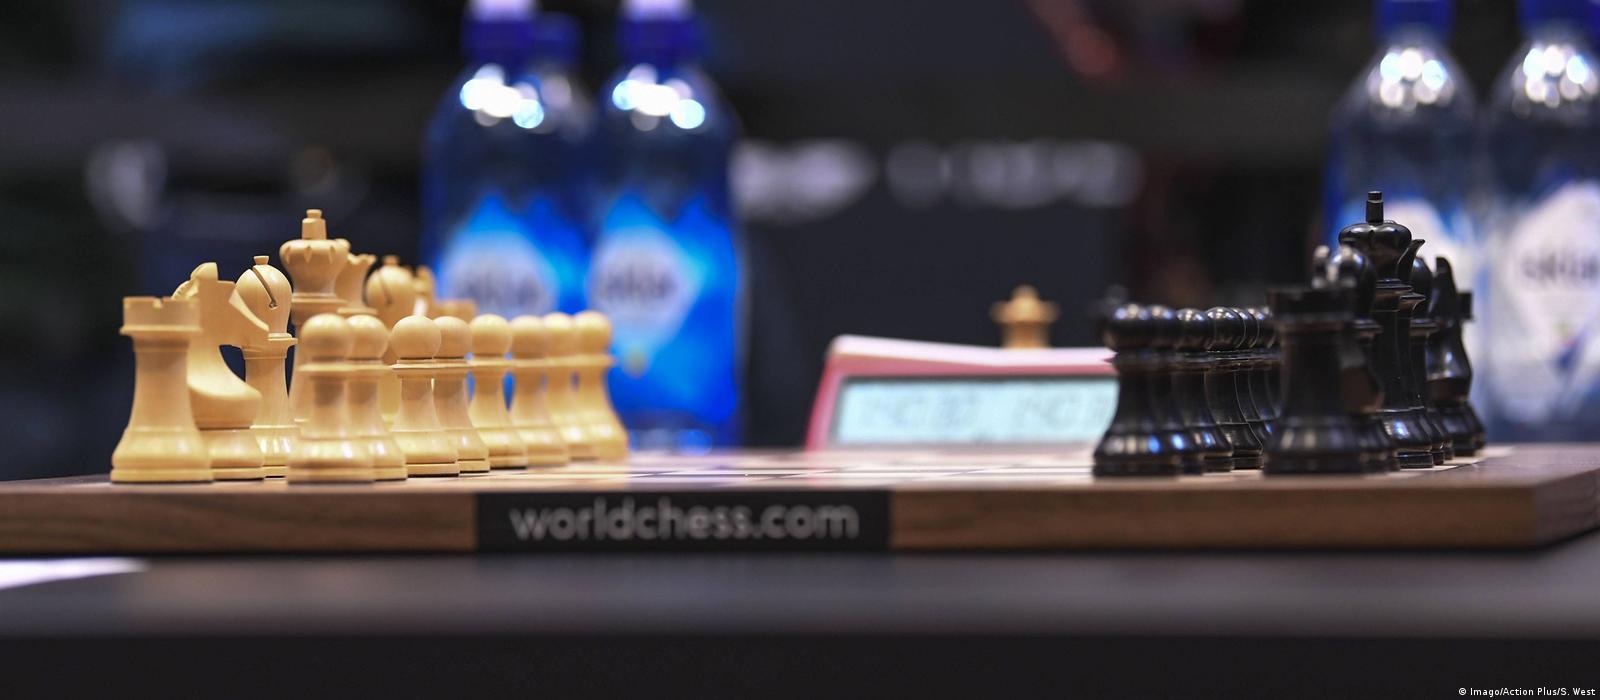 4 Things We Can All Learn from the Candidates Tournament 2018 -  TheChessWorld